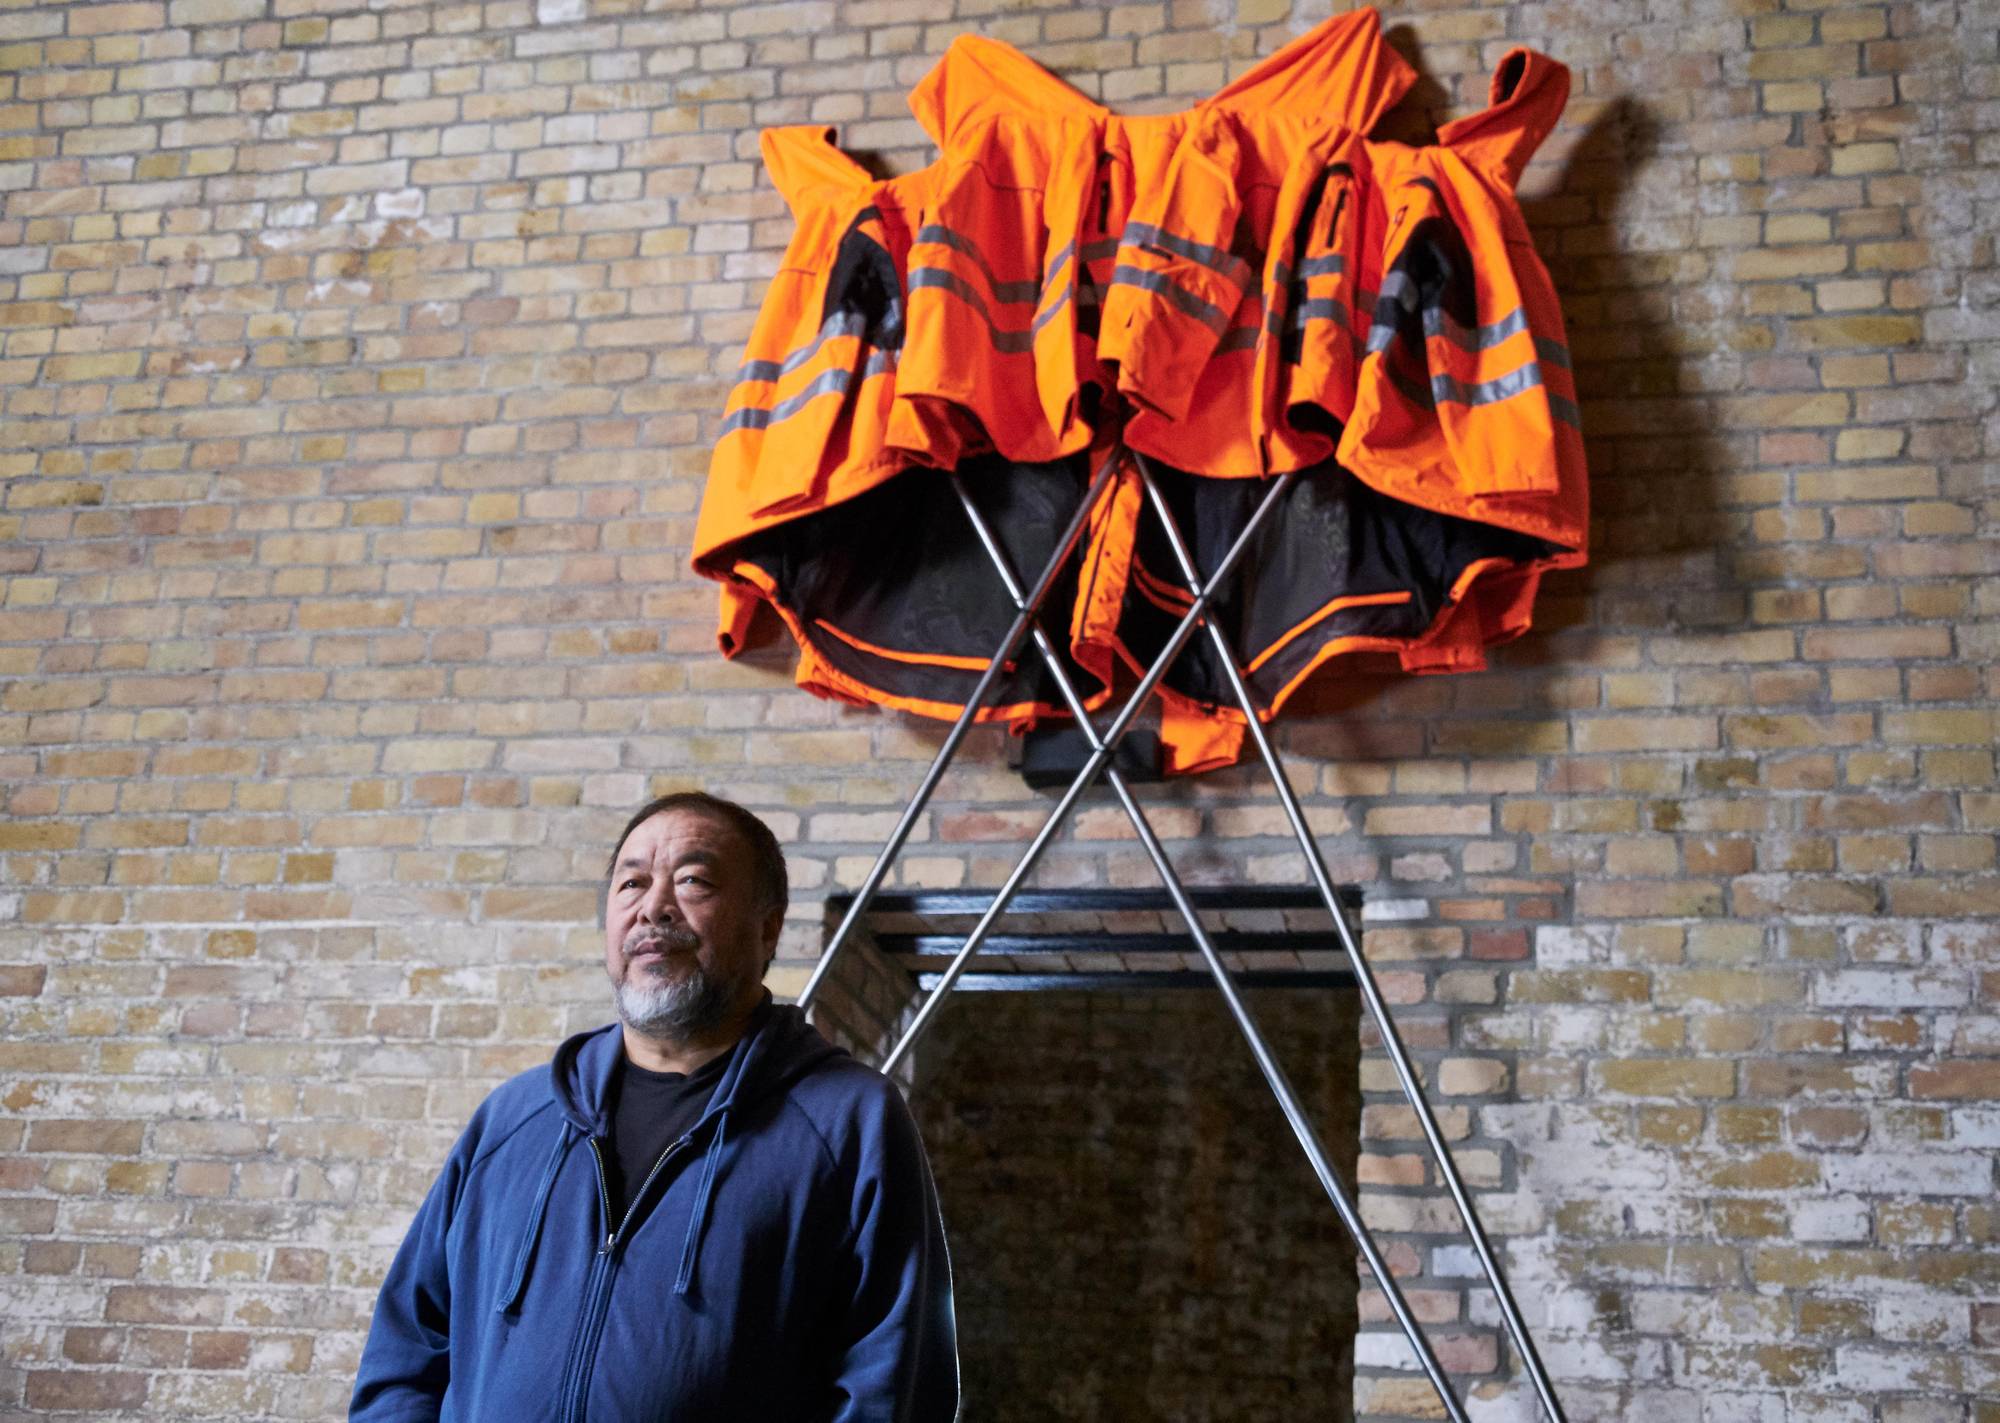 The artist Ai Weiwei presents a work for people to make themselves.